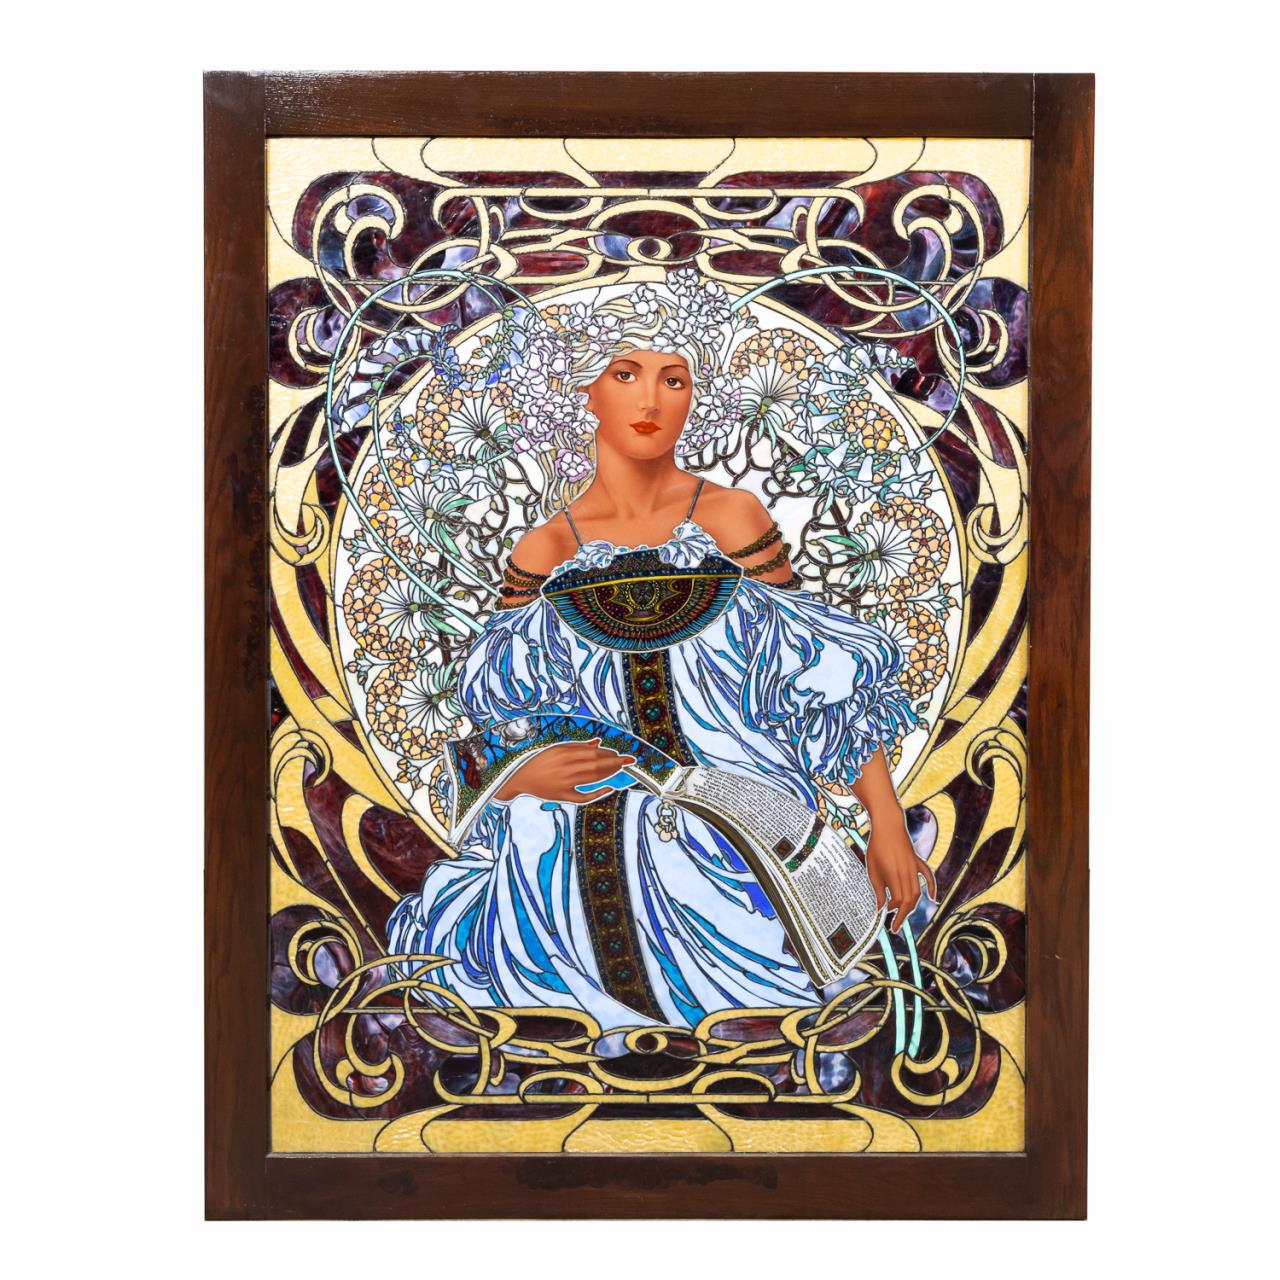 BOGENRIEF ART NOUVEAU-STYLE STAINED